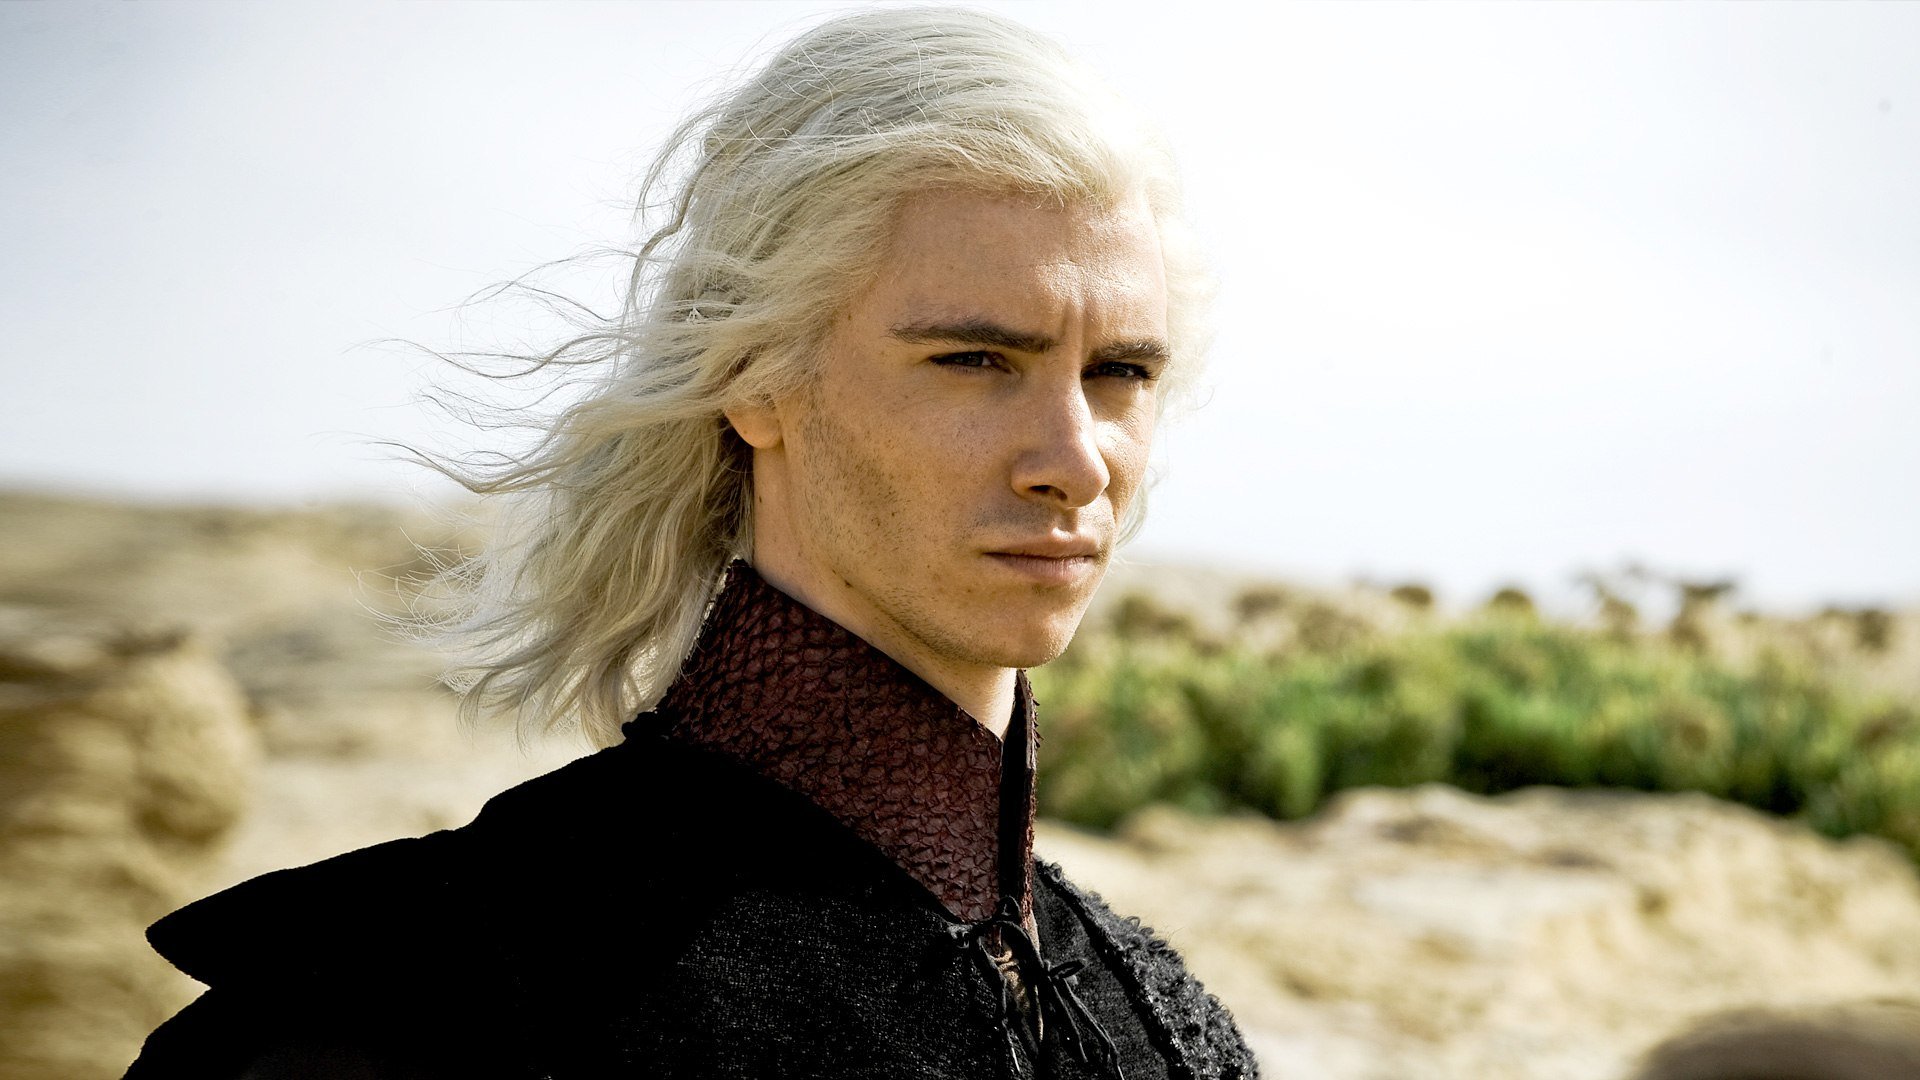 Viserys stands in the desert, with the wind blowing in his hair, in a scene from 'Game of Thrones.'